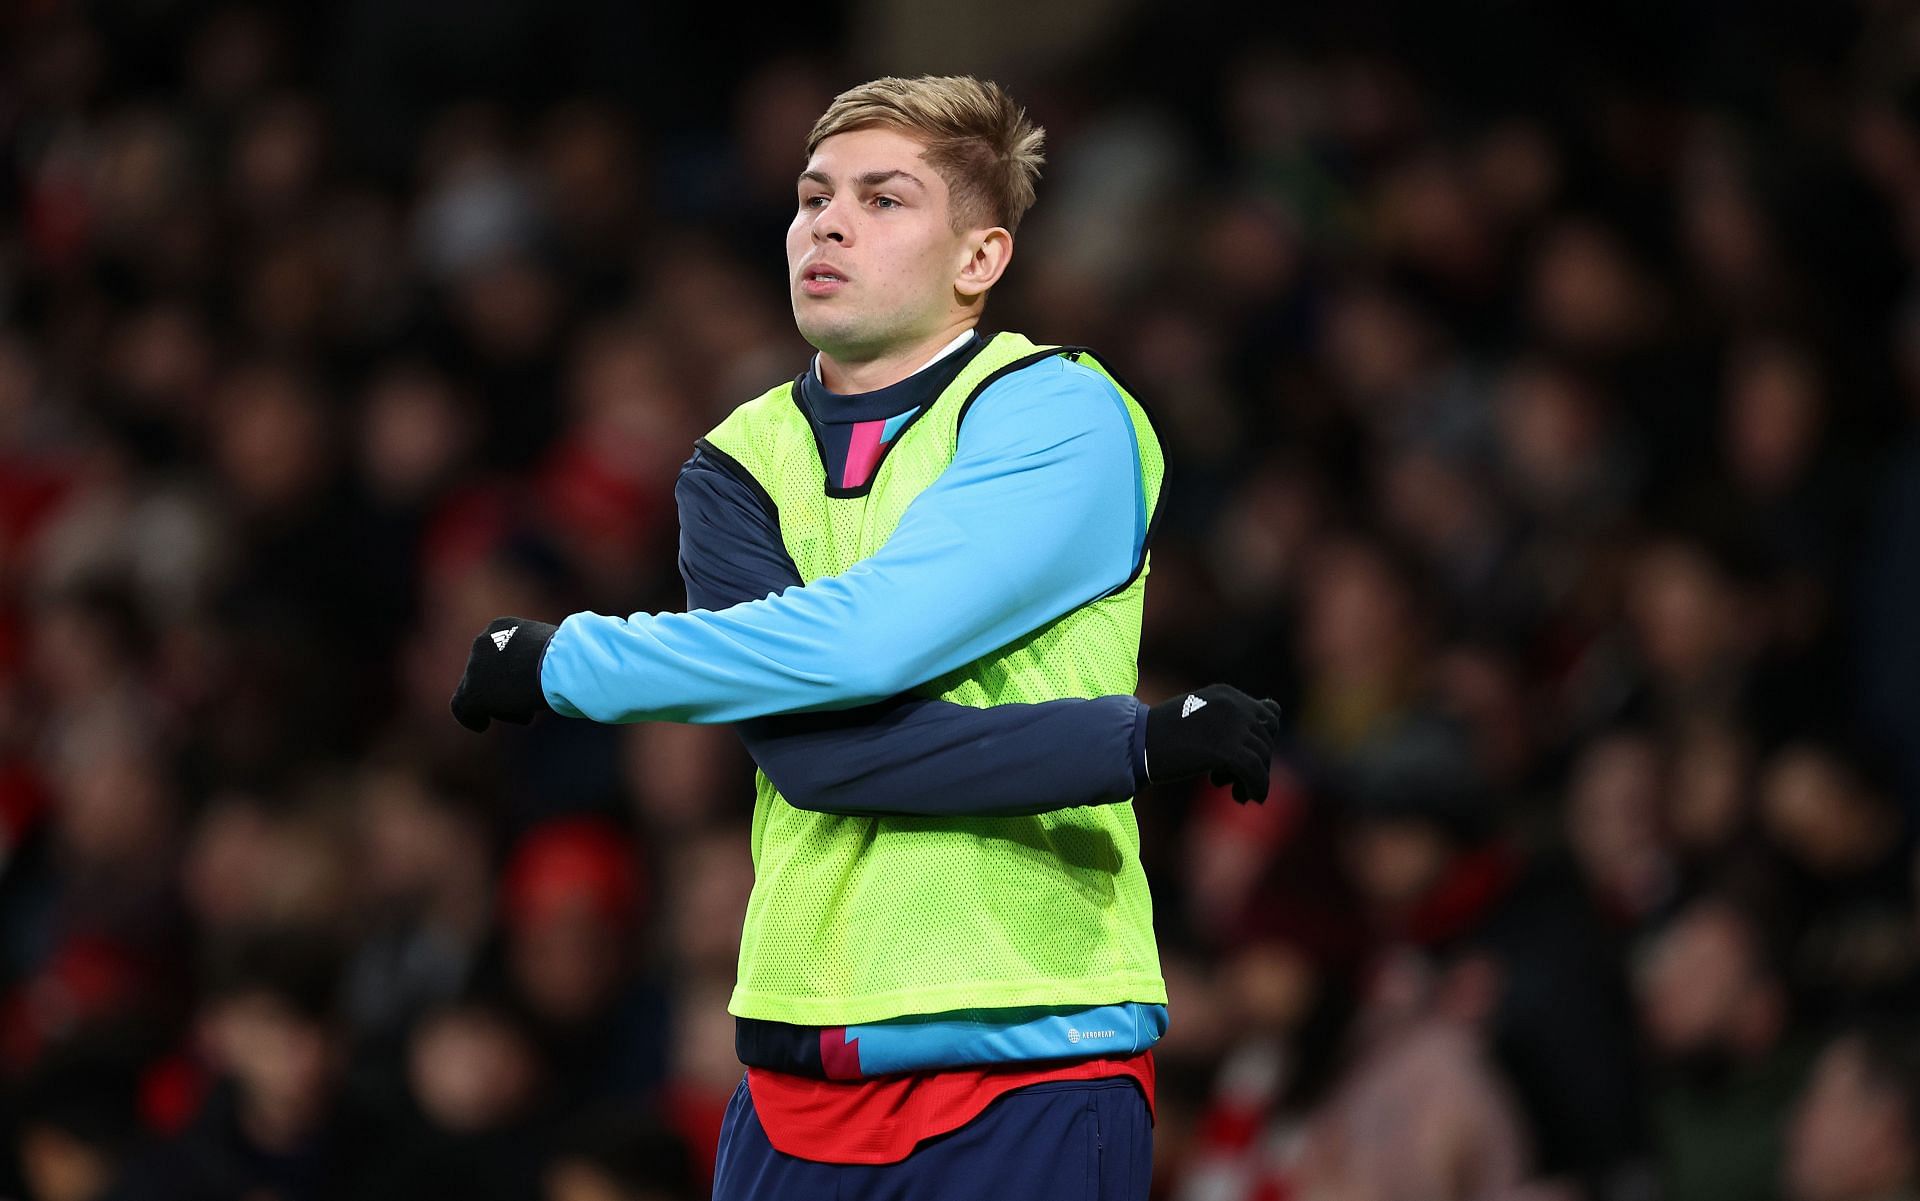 The Gunners may be looking to offload Smith Rowe.